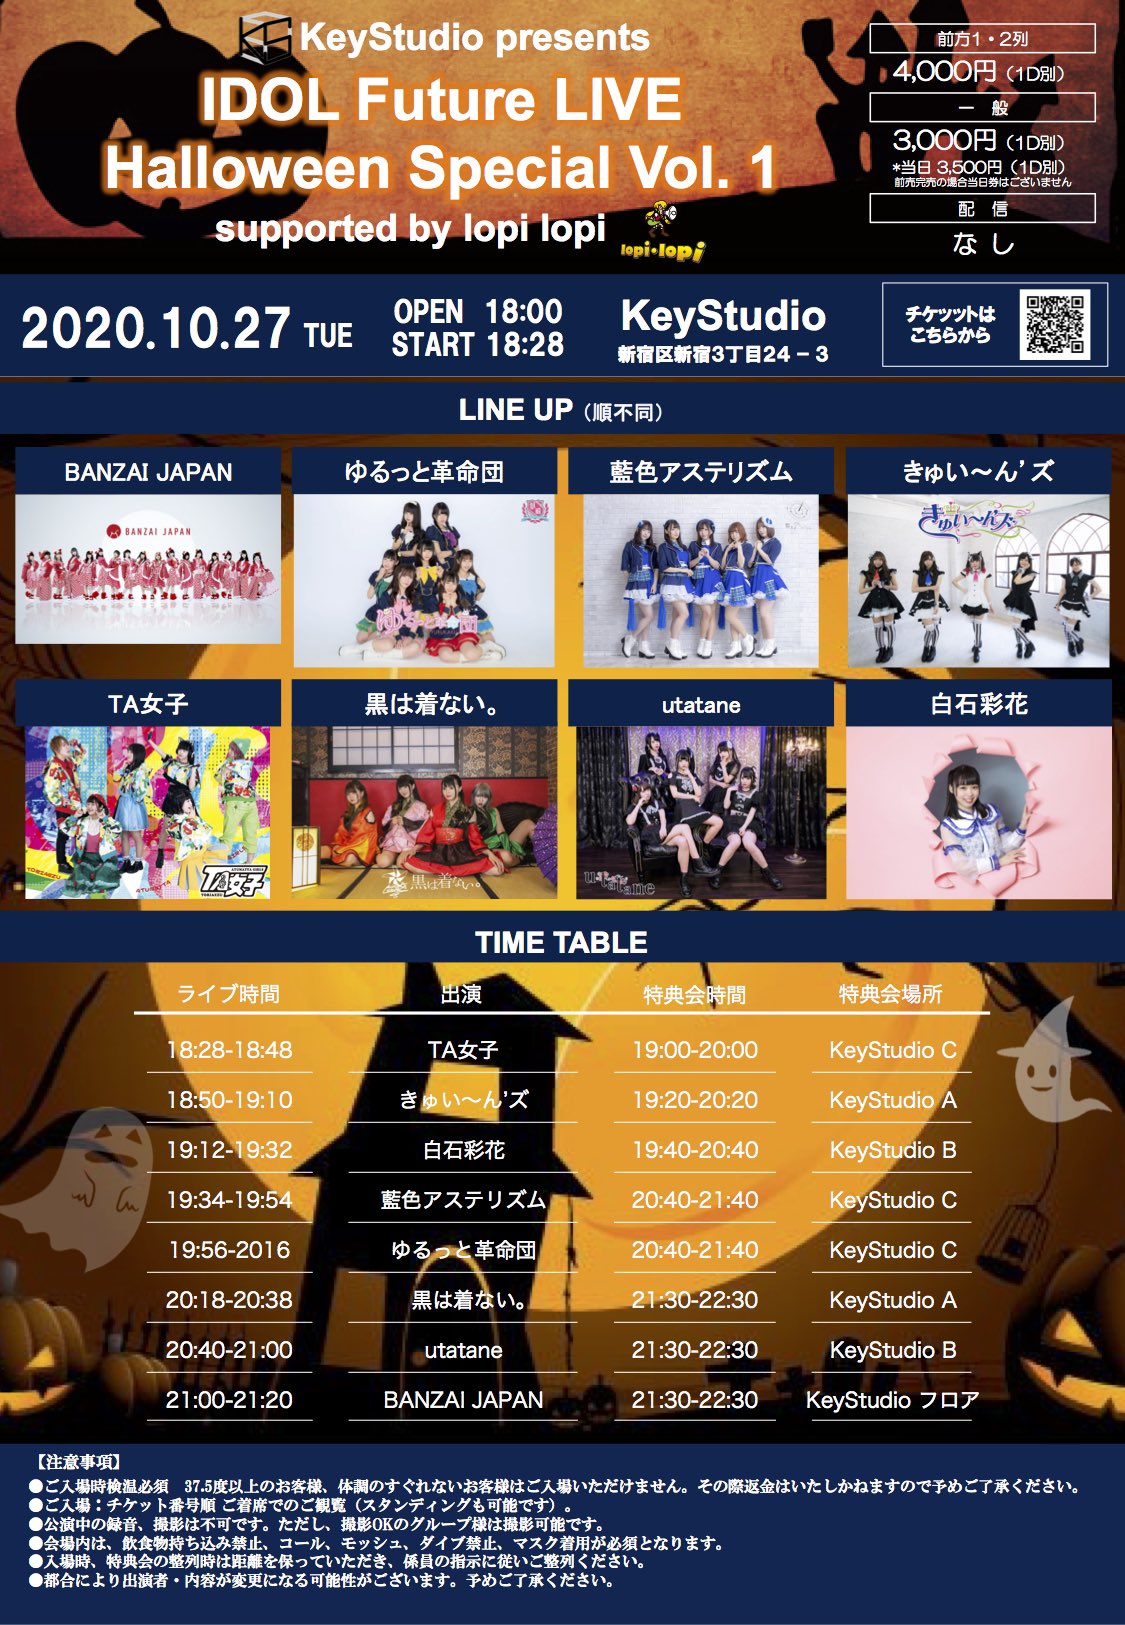 IDOL Future LIVE Halloween Special Vol.1 supported by lopi lopi